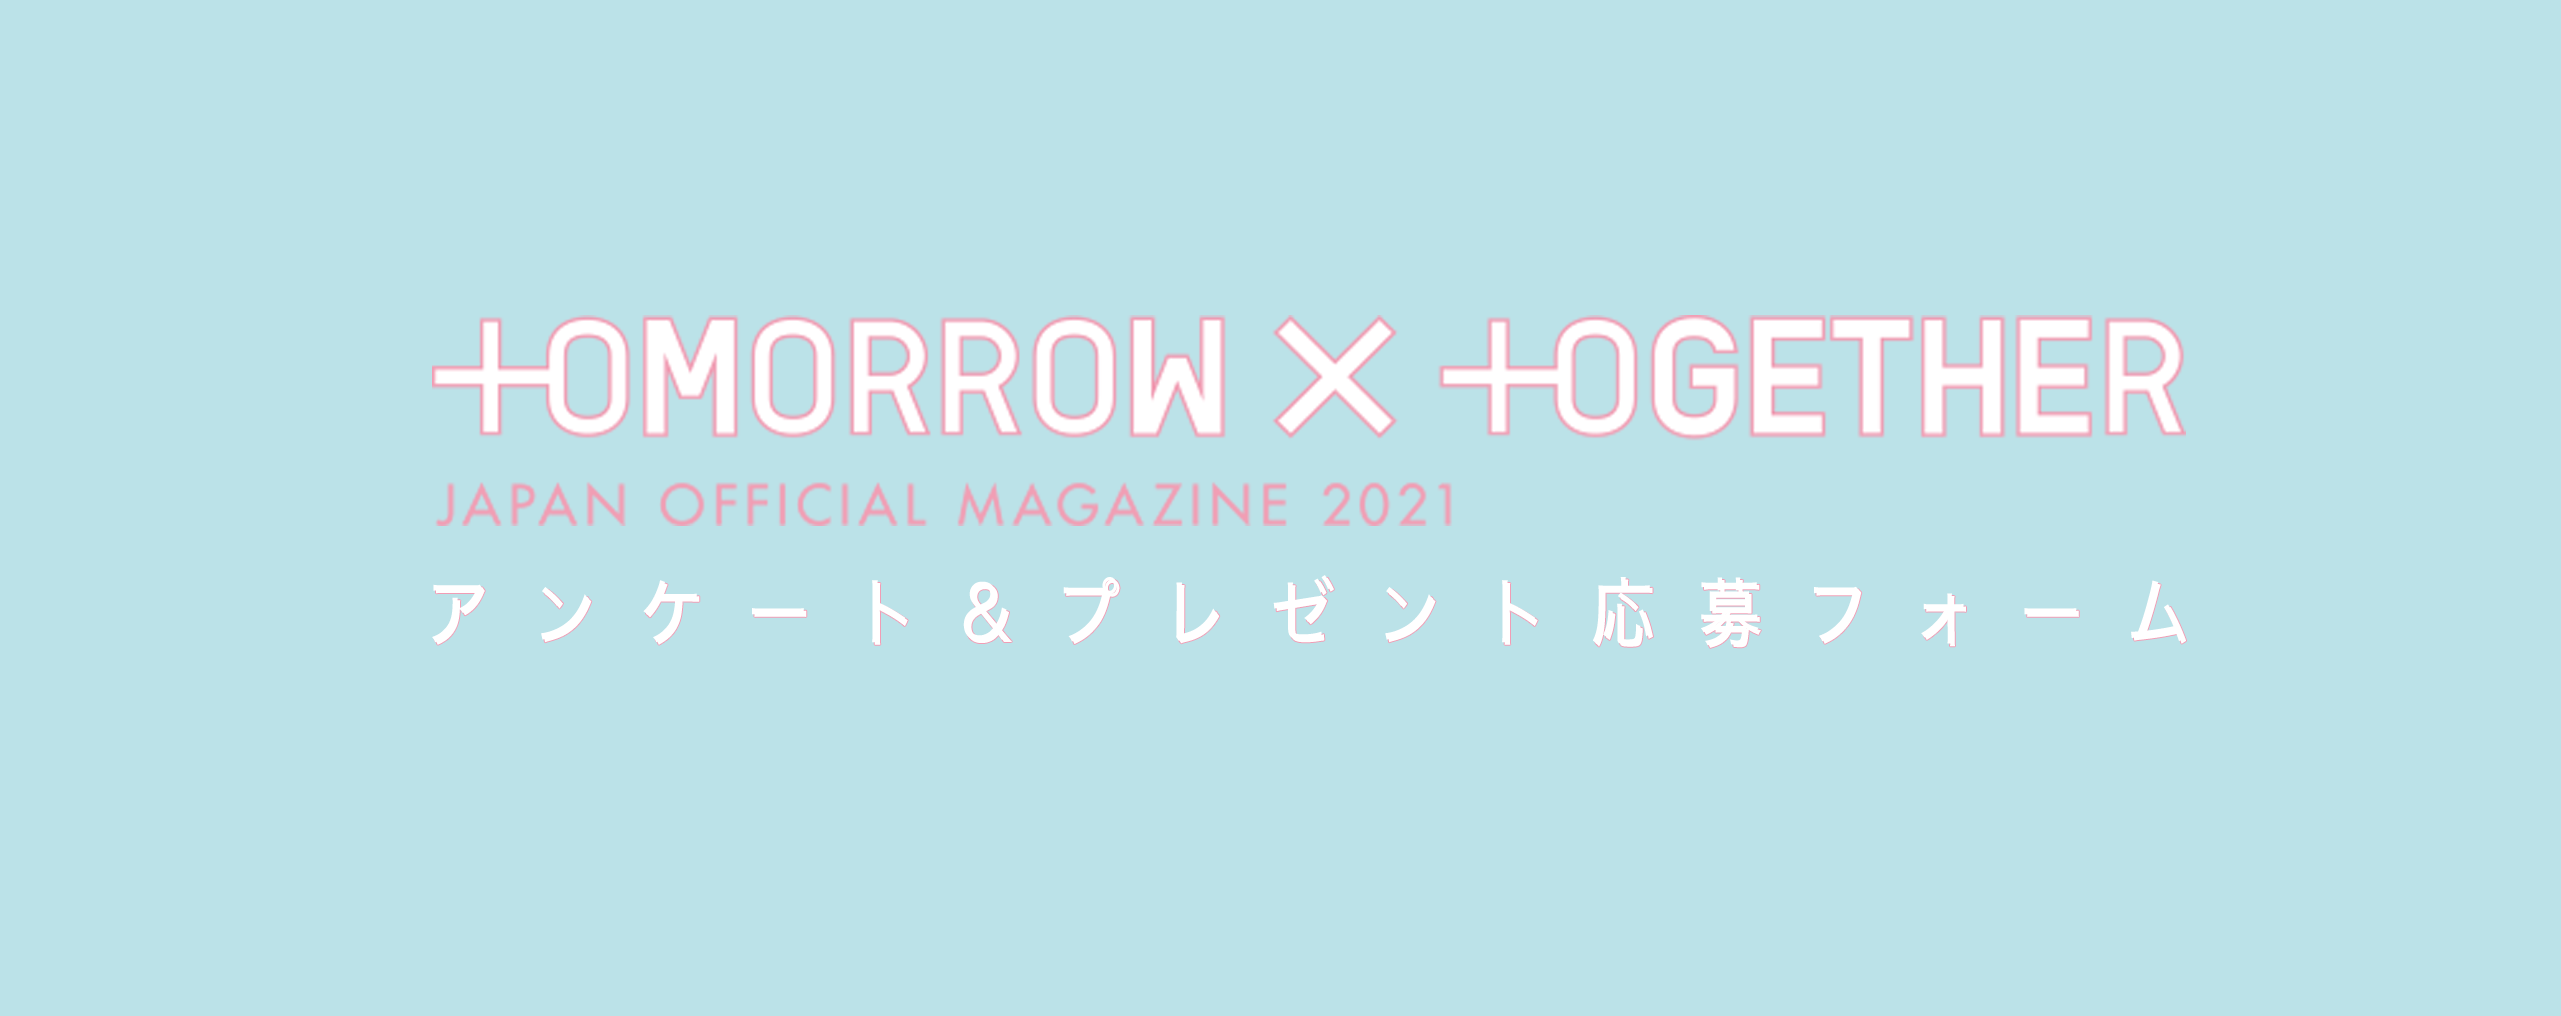 TOMORROW X TOGETHER JAPAN OFFICIAL MAGAZINE 2021 アンケート＆プレゼント